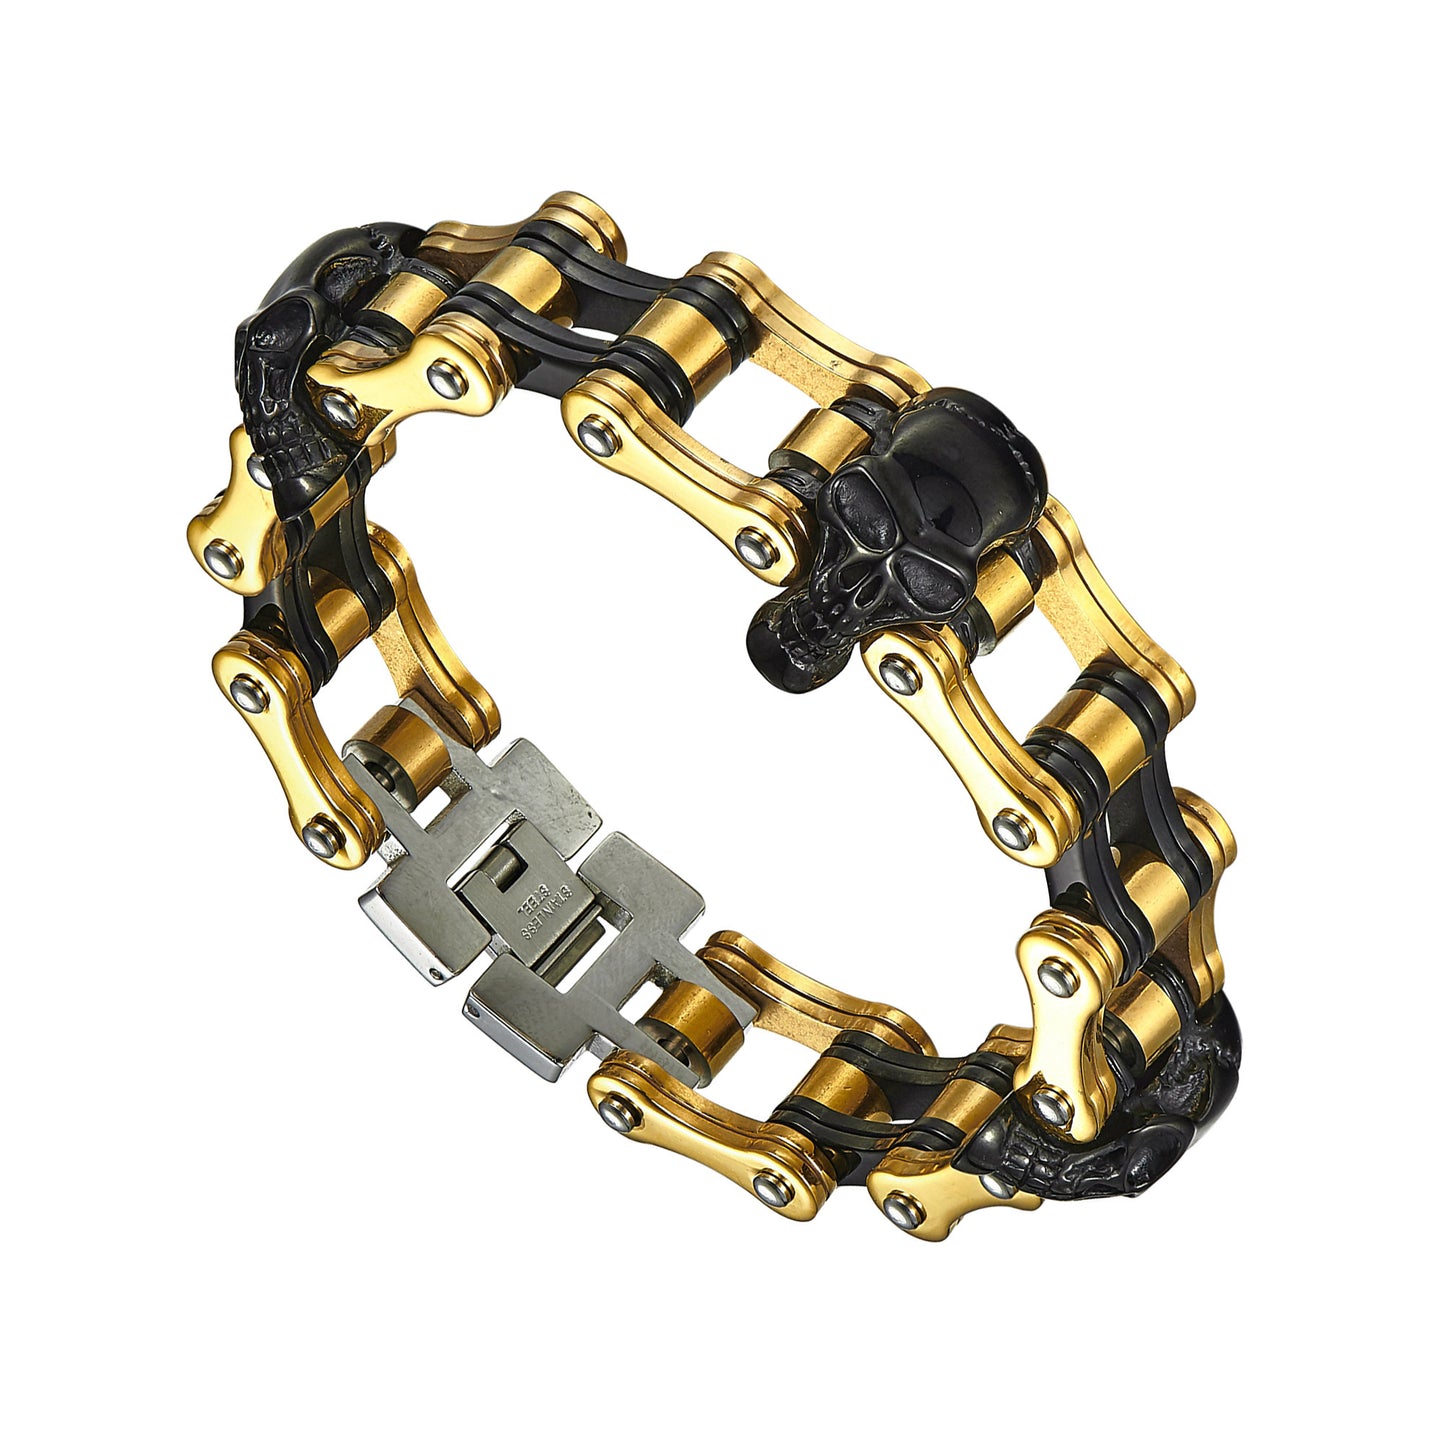 Skull Link Bracelet Stainless Steel Gold Black Finish Unique Motorcycle Chain